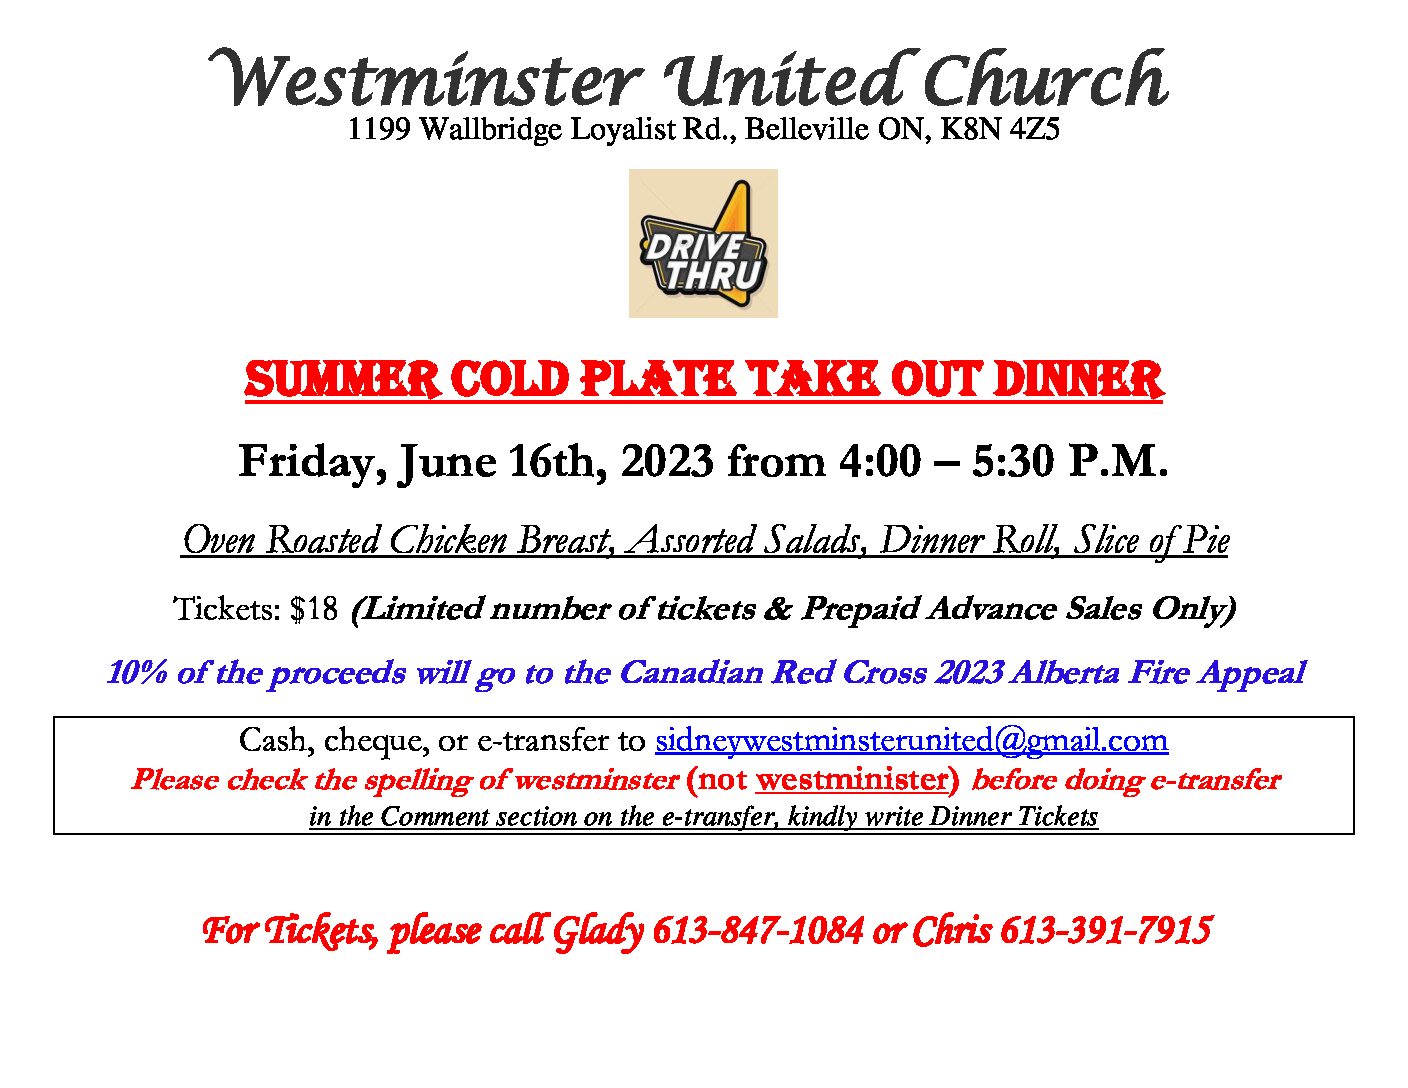 Summer Cold Plate Take-Out Dinner